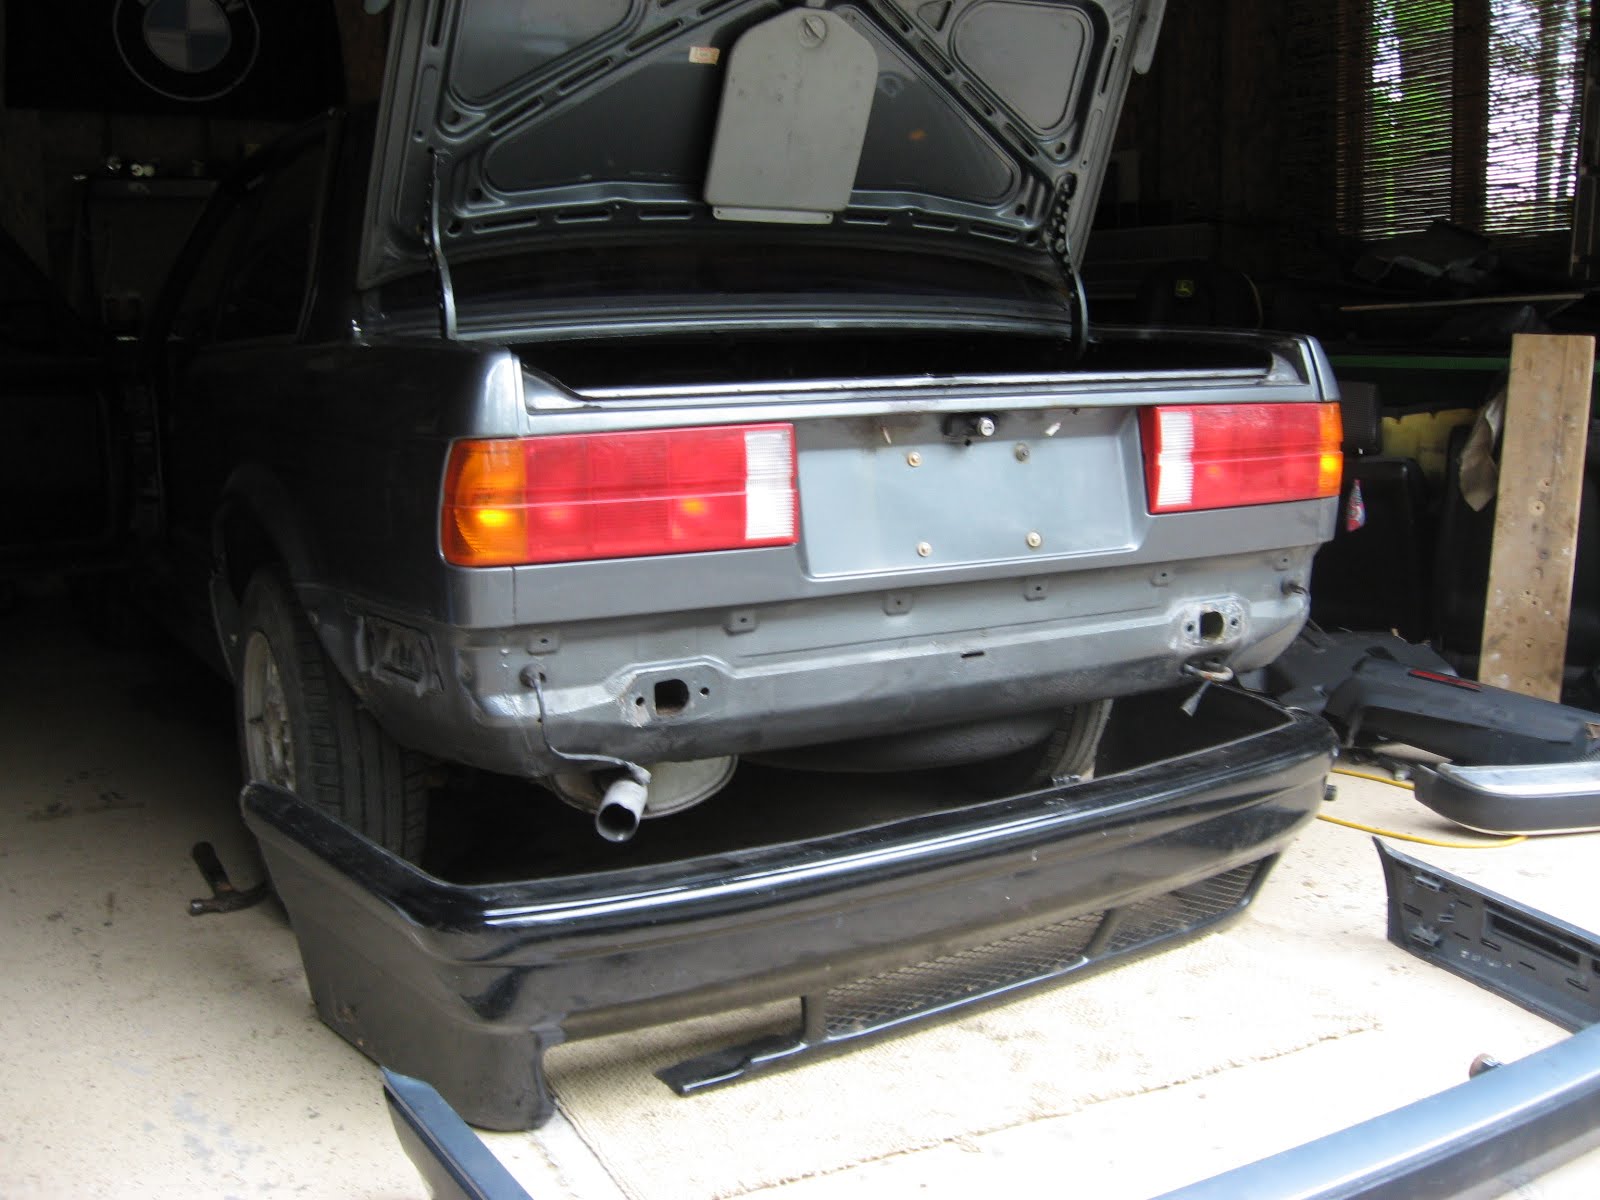 Bmw E30 Bumper Related Posts.